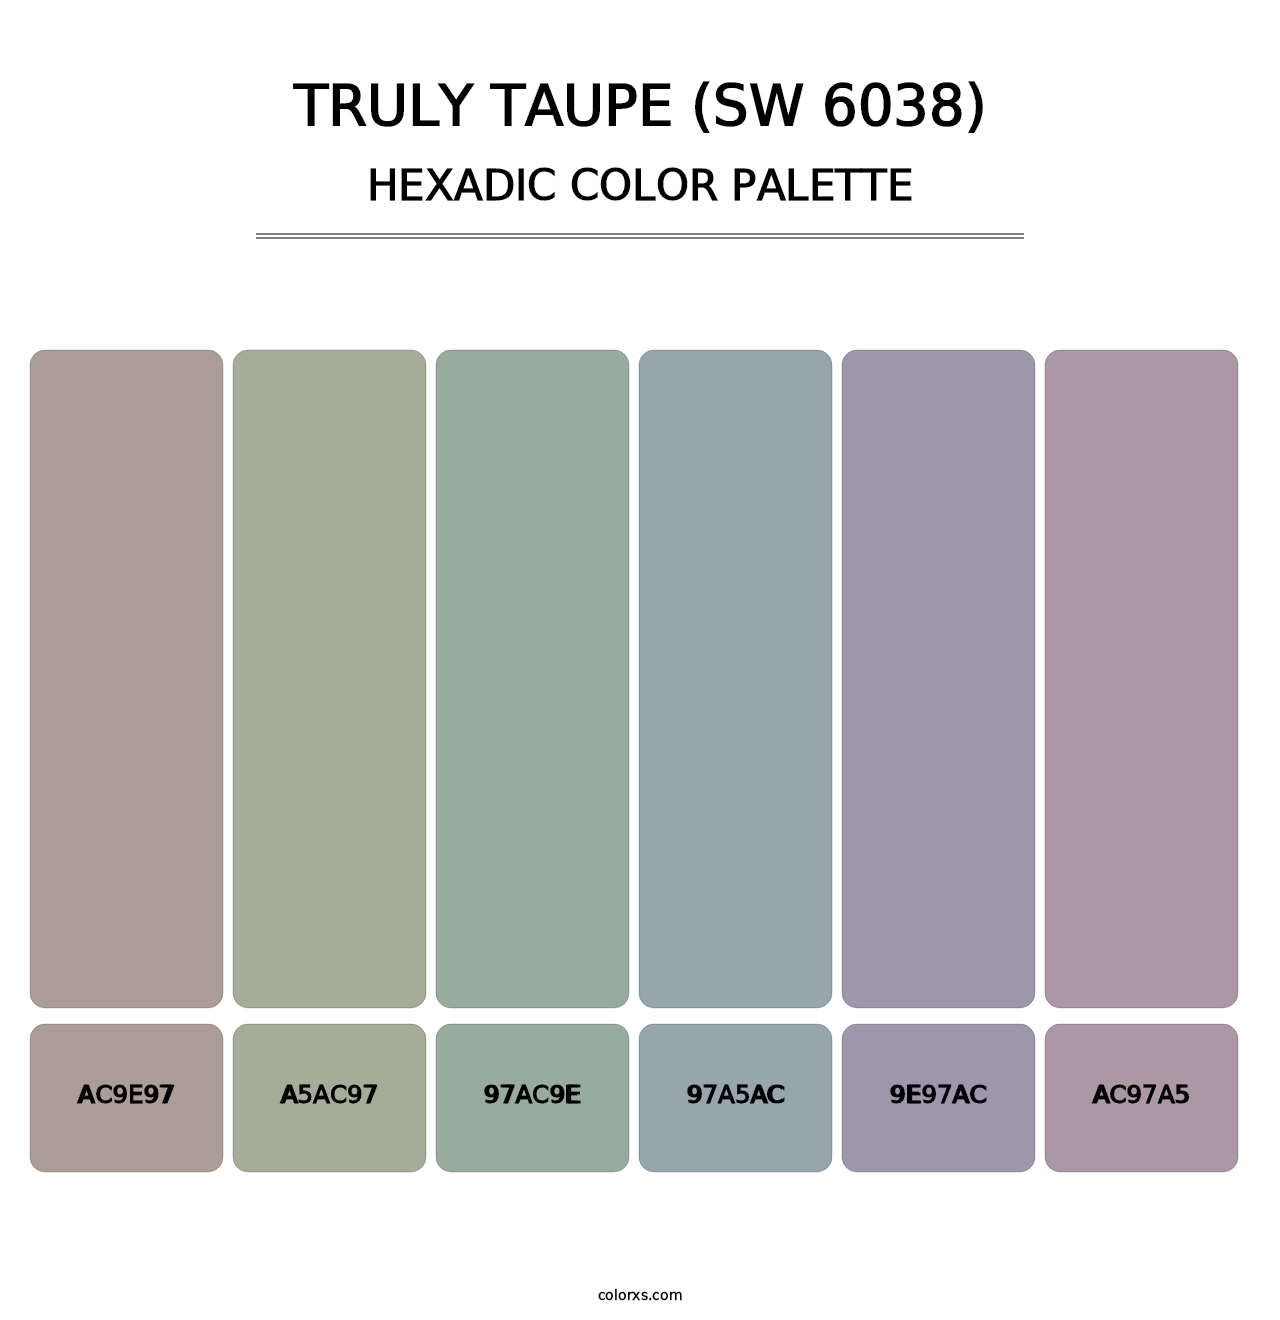 Truly Taupe (SW 6038) - Hexadic Color Palette